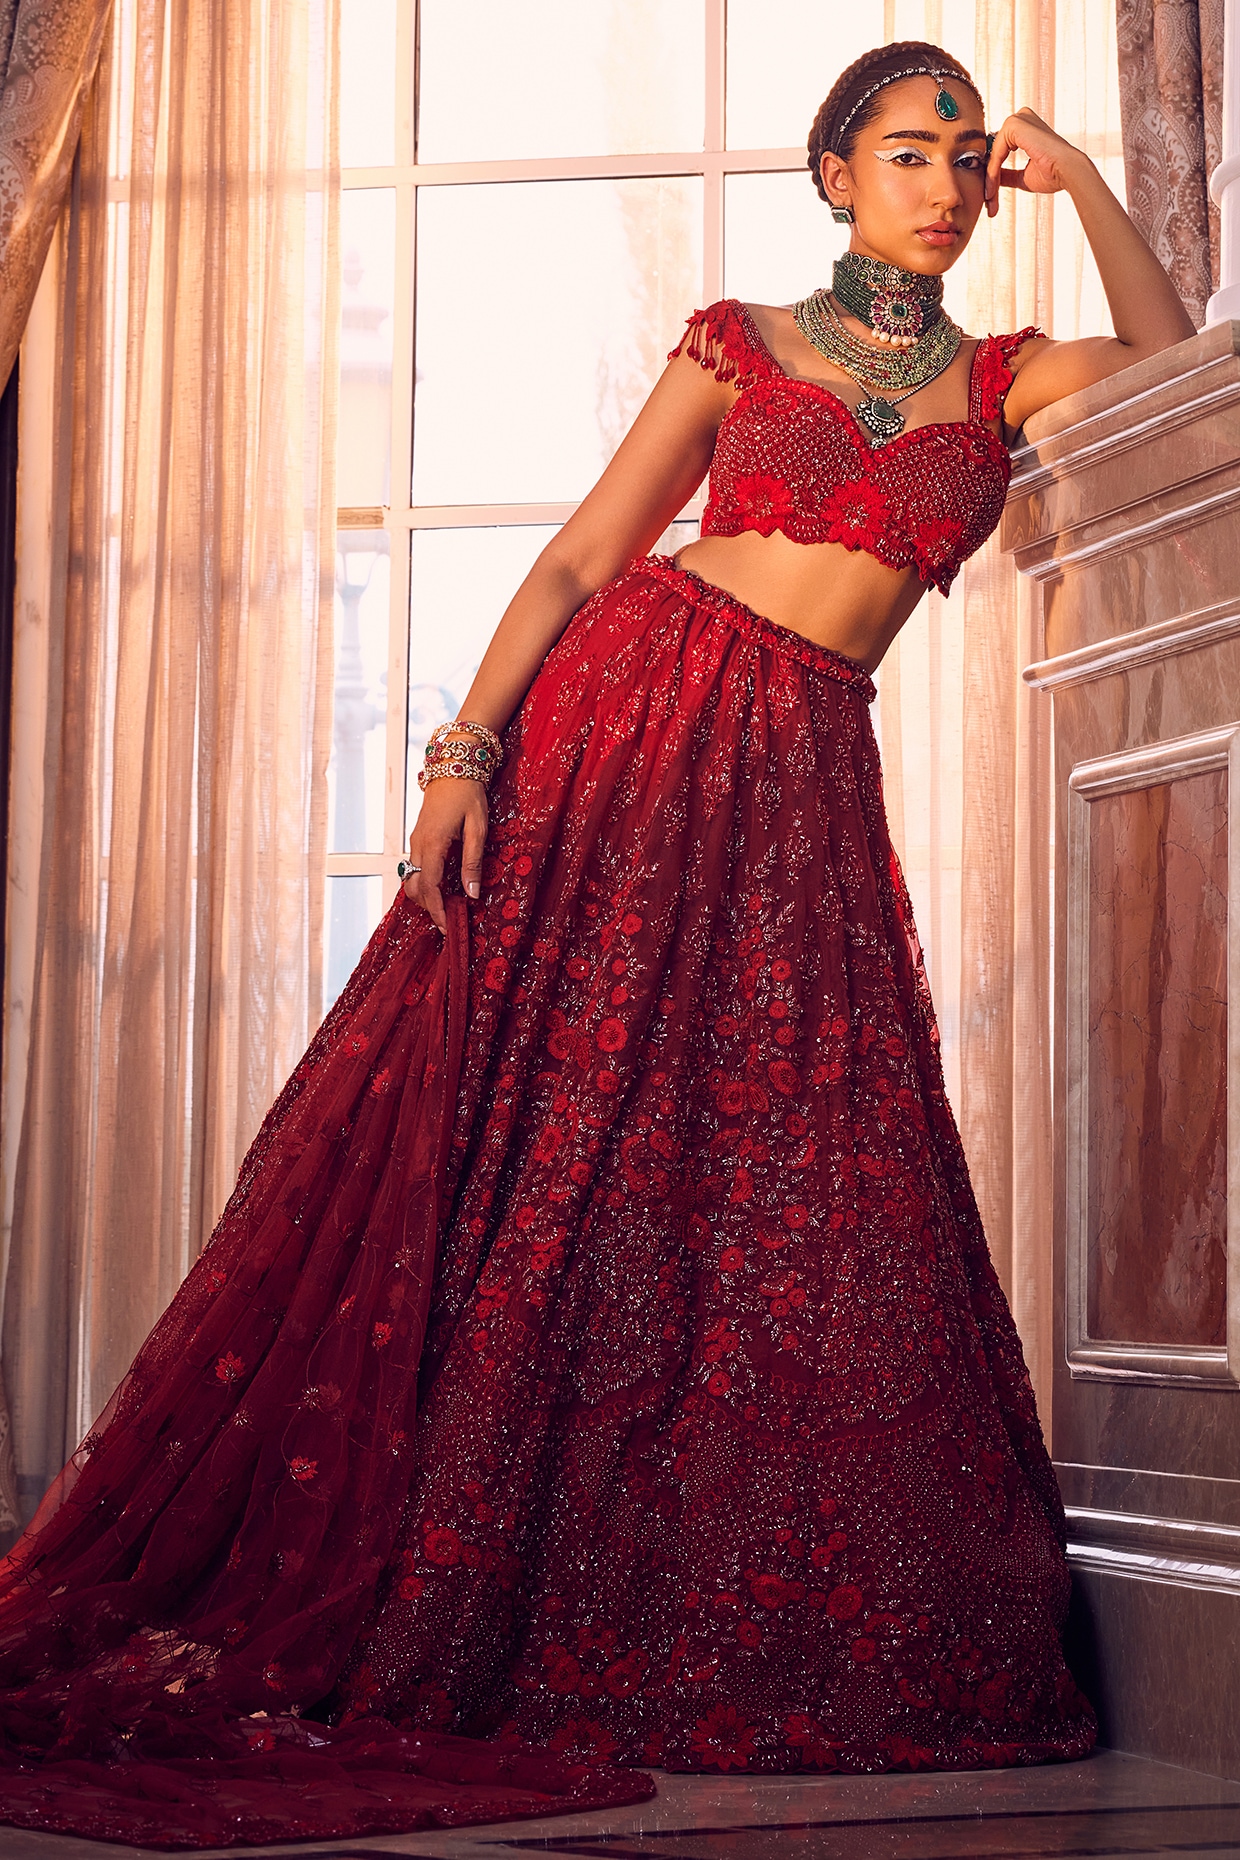 Top Lehenga Designs for Sister Of The Bride - Witty Vows | Bride sister,  Bride, Wedding dresses unique